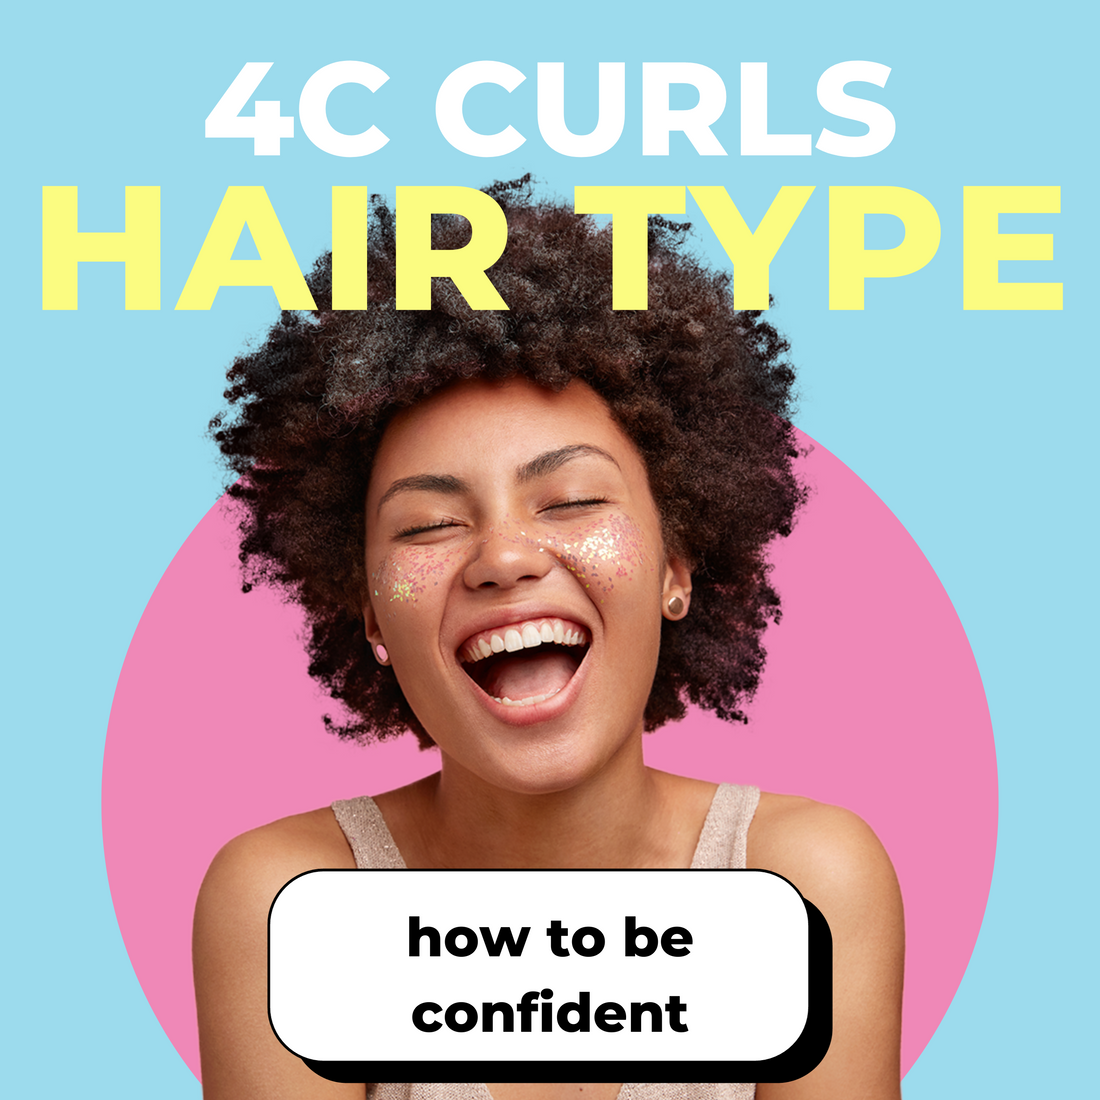 How To Be Confident With 4C Curls